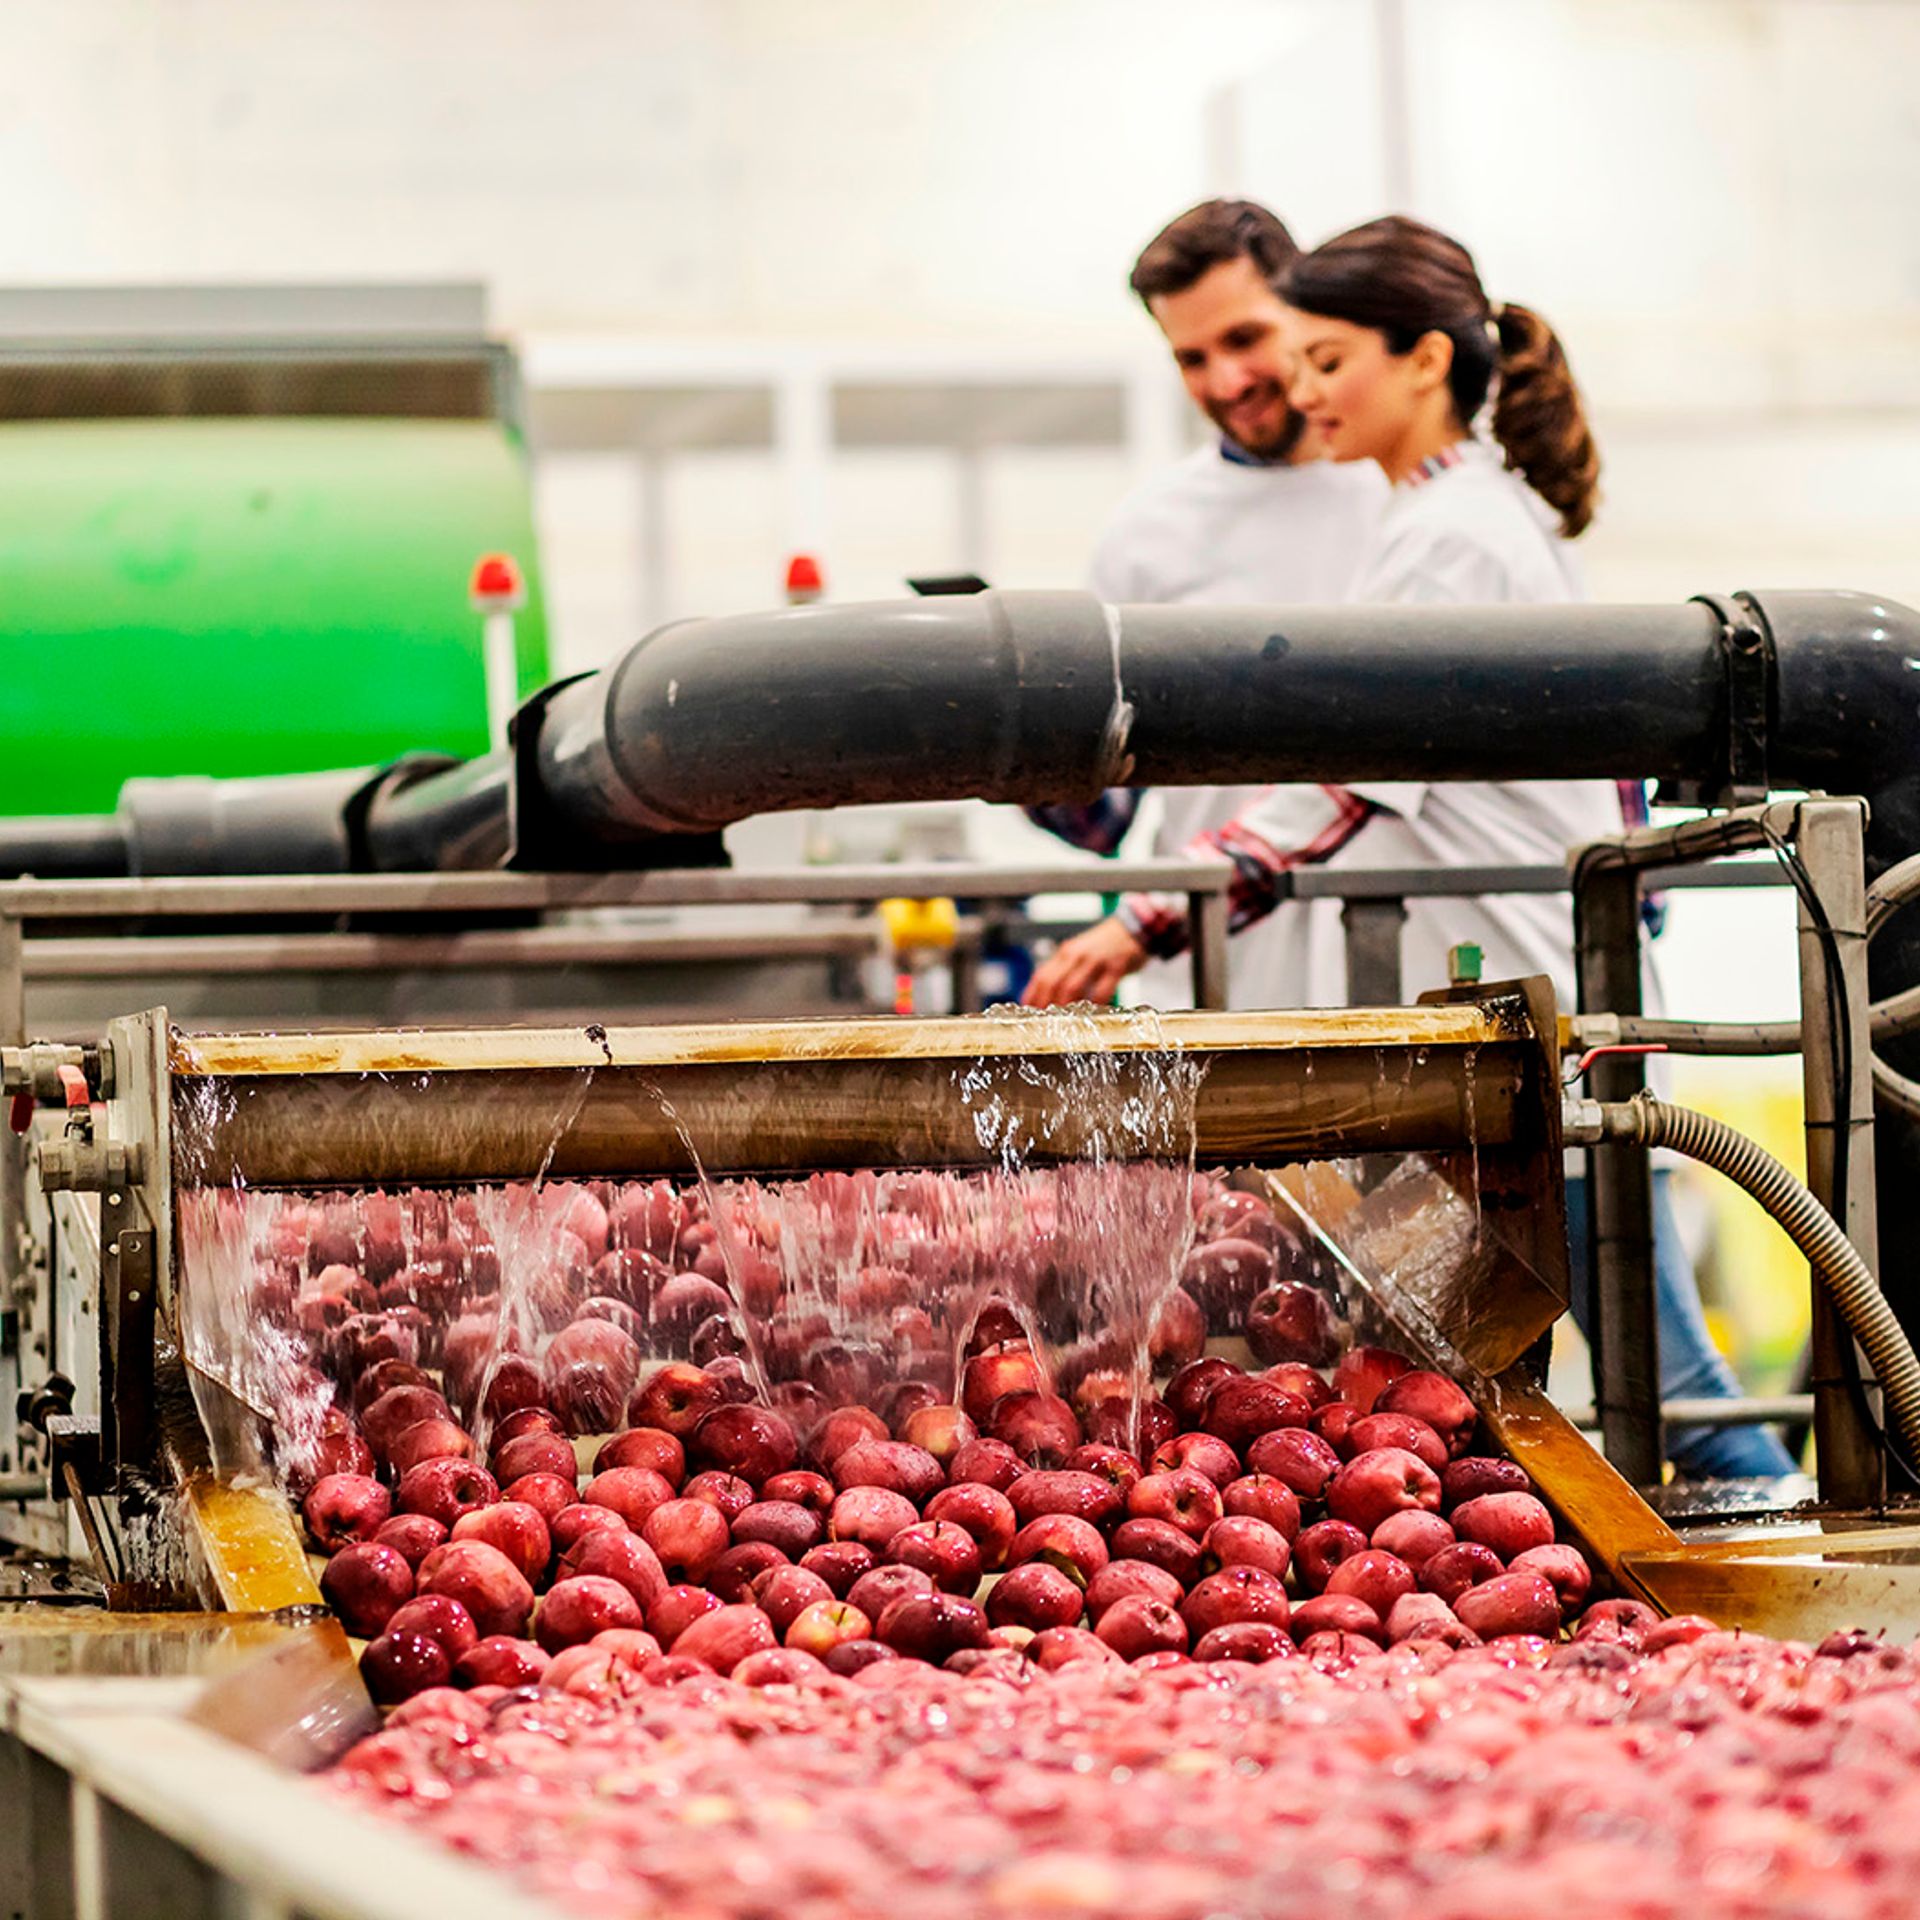 Image of two employees washing fruit before labeling in a processing facility